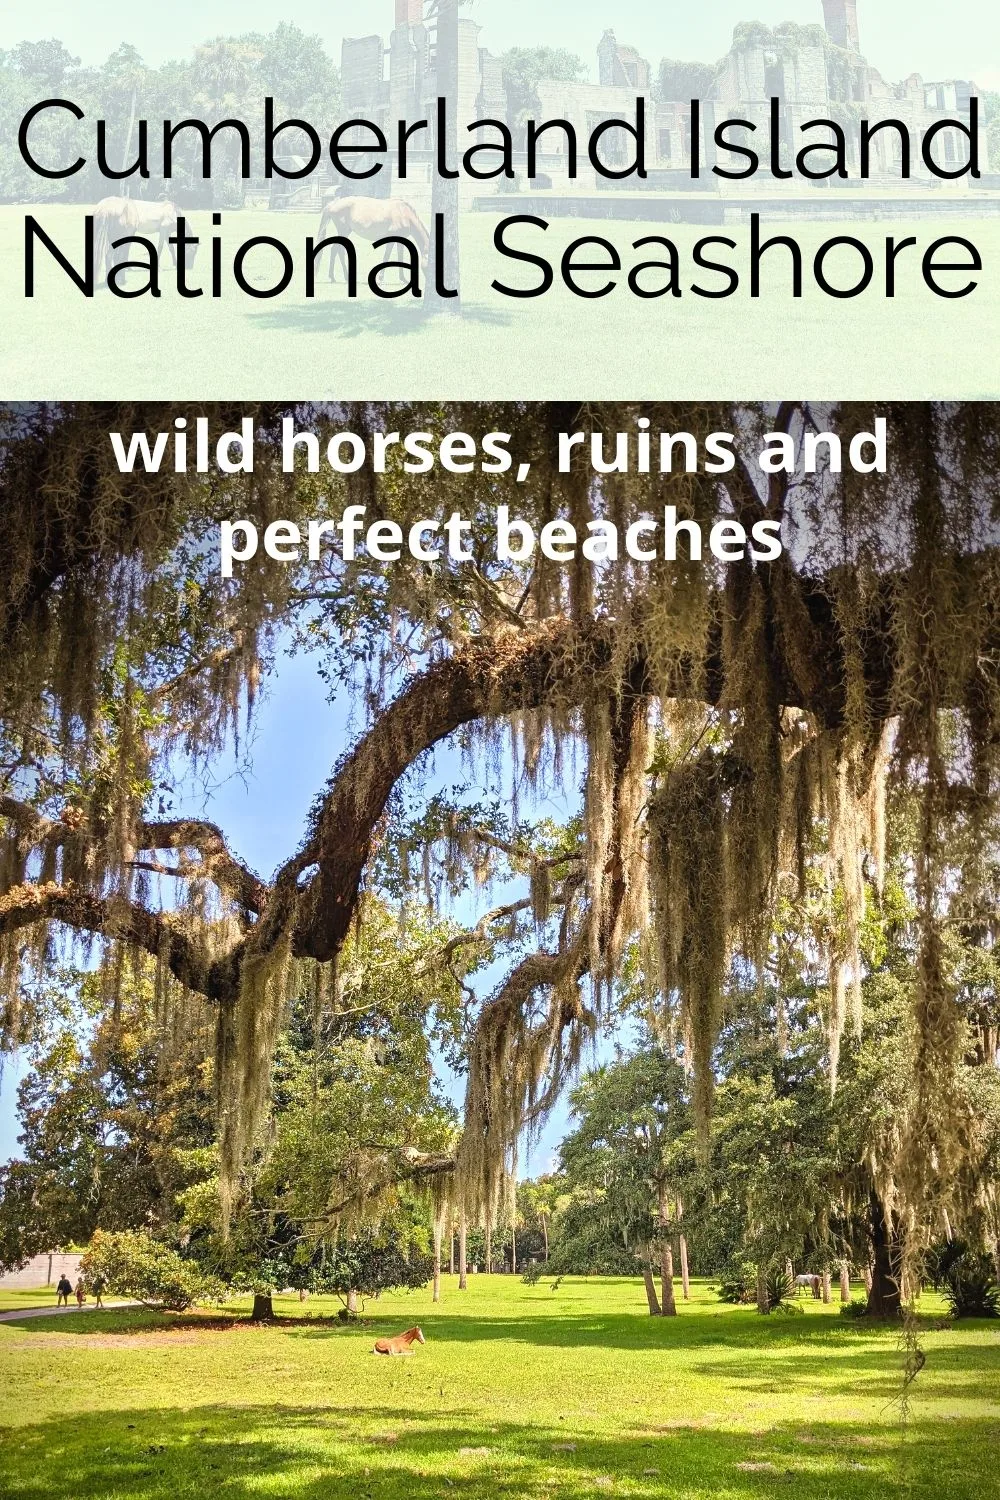 Do you know about Cumberland Island National Seashore and the wild horses? This is a guide to visiting an incredible National Park site on the Georgia coast between Savannah and Jacksonville. Everything you need to know to plan and have an amazing visit to Cumberland Island.